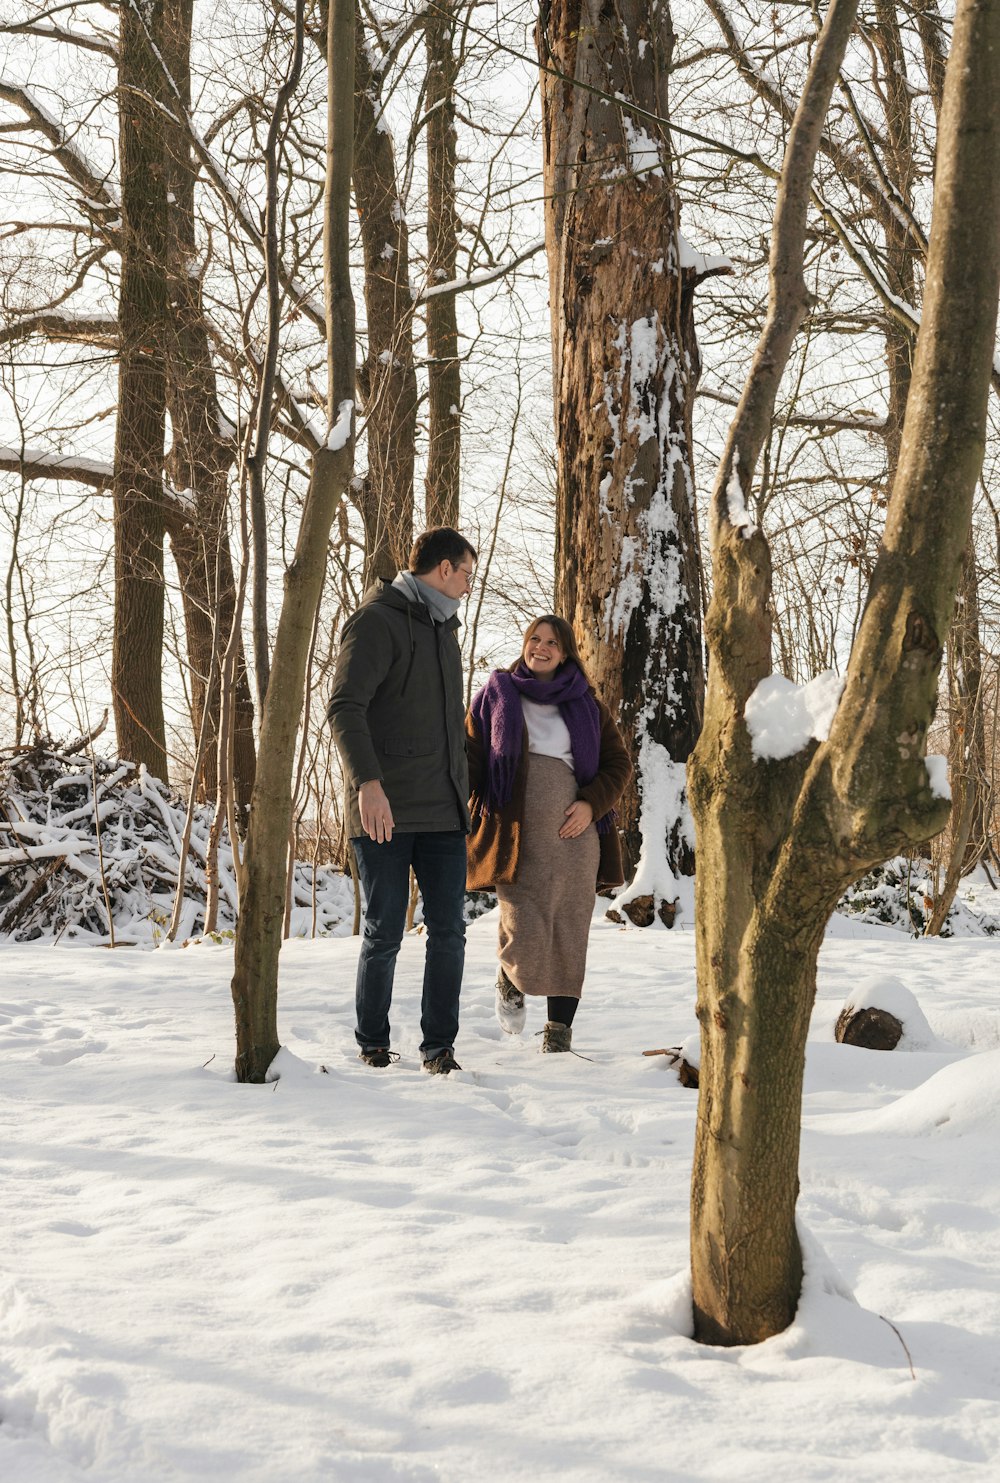 a man and a woman walking through a snowy forest